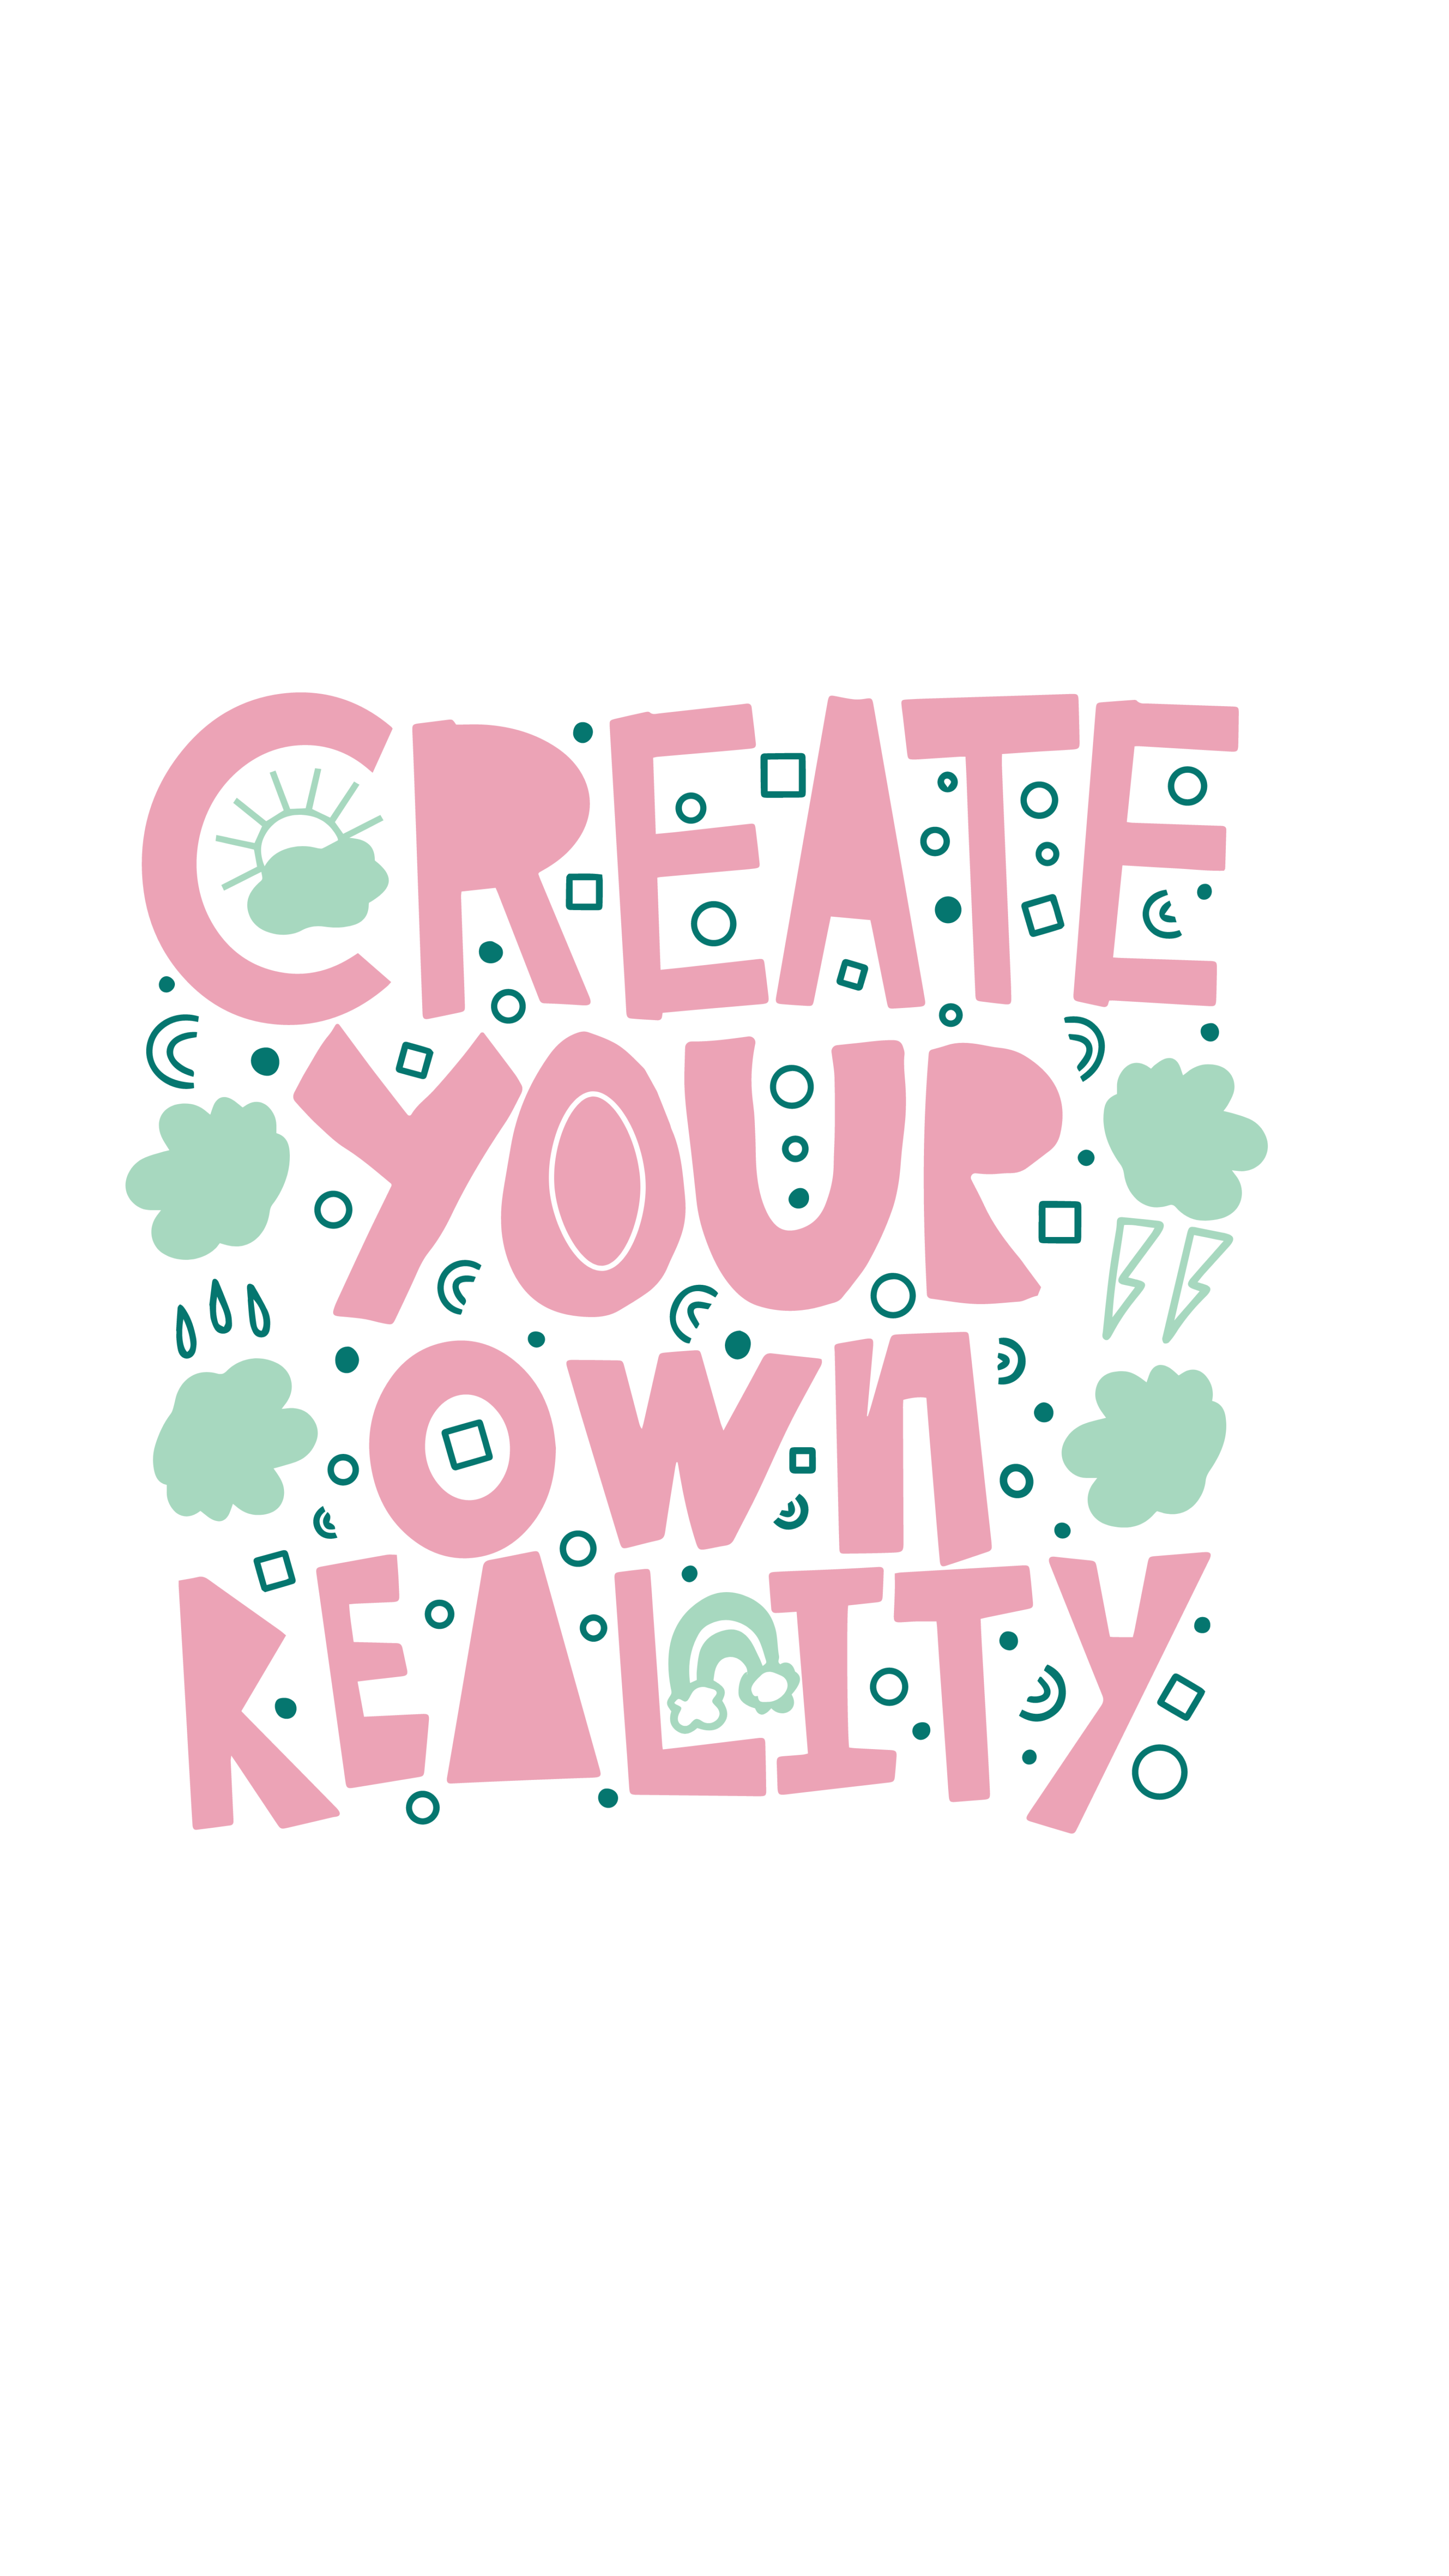 42 Best Tshirts Design Create Your Own Reality.